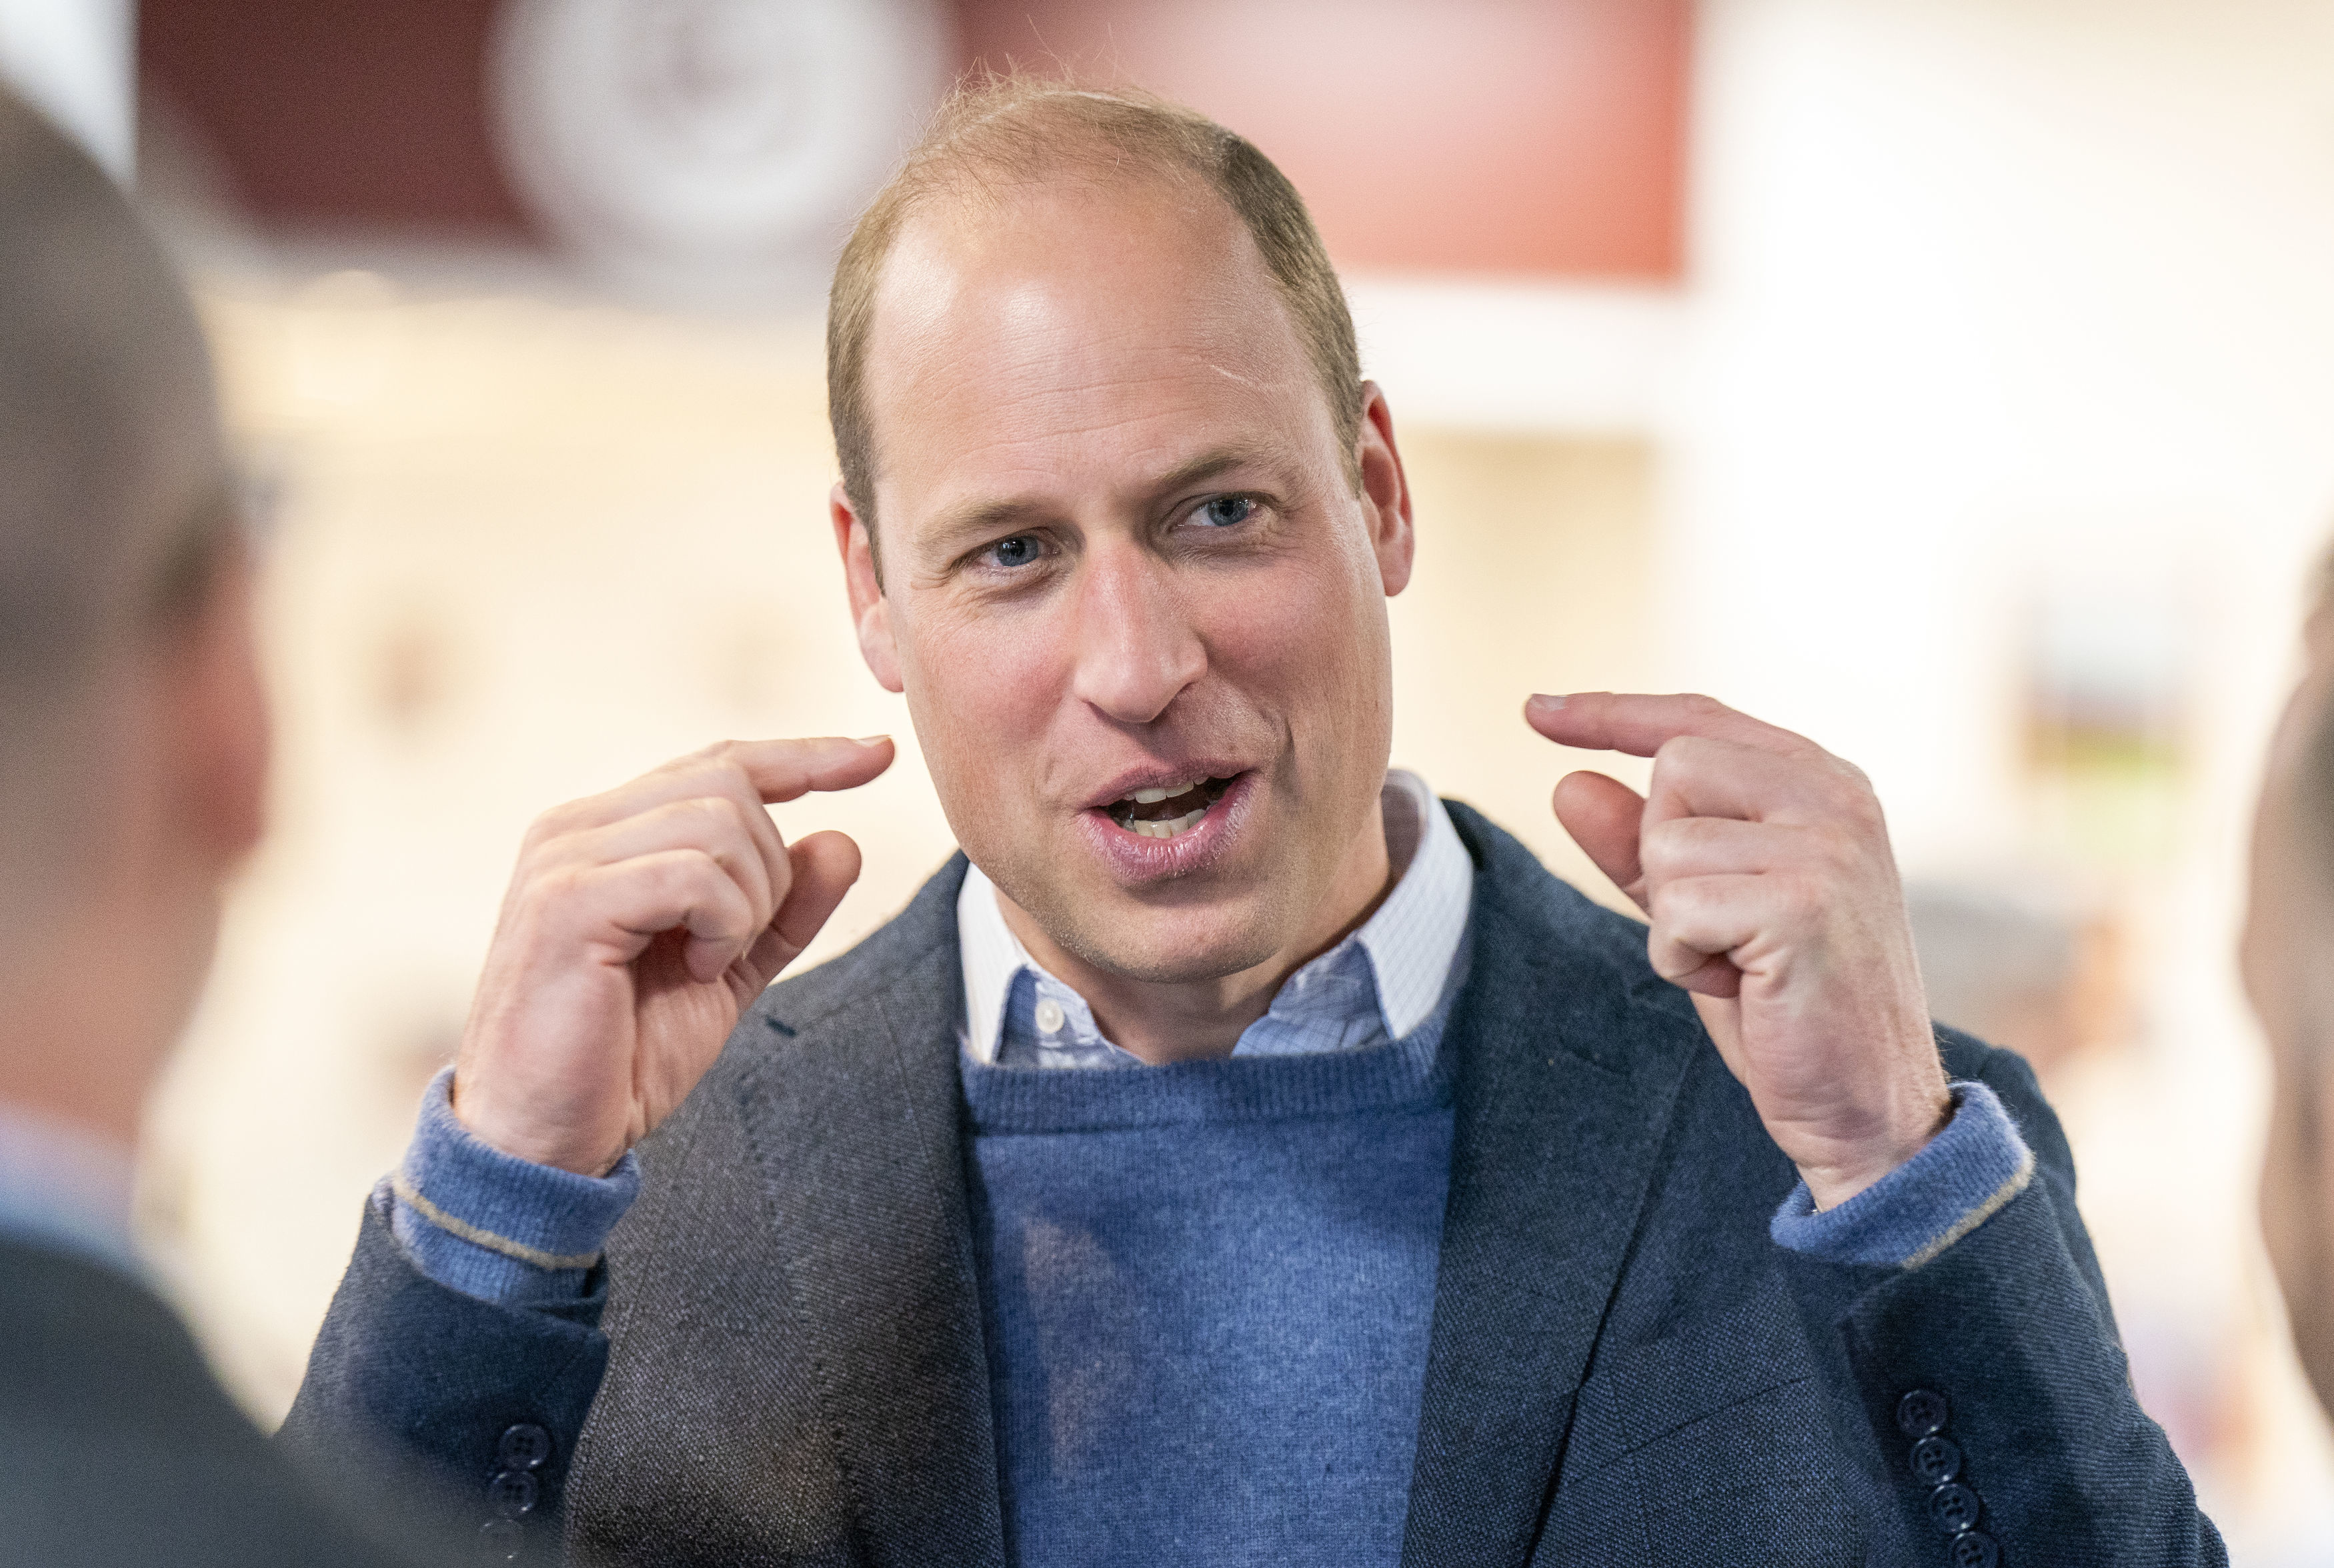 Close-up of William gesturing in a sweater and jacket